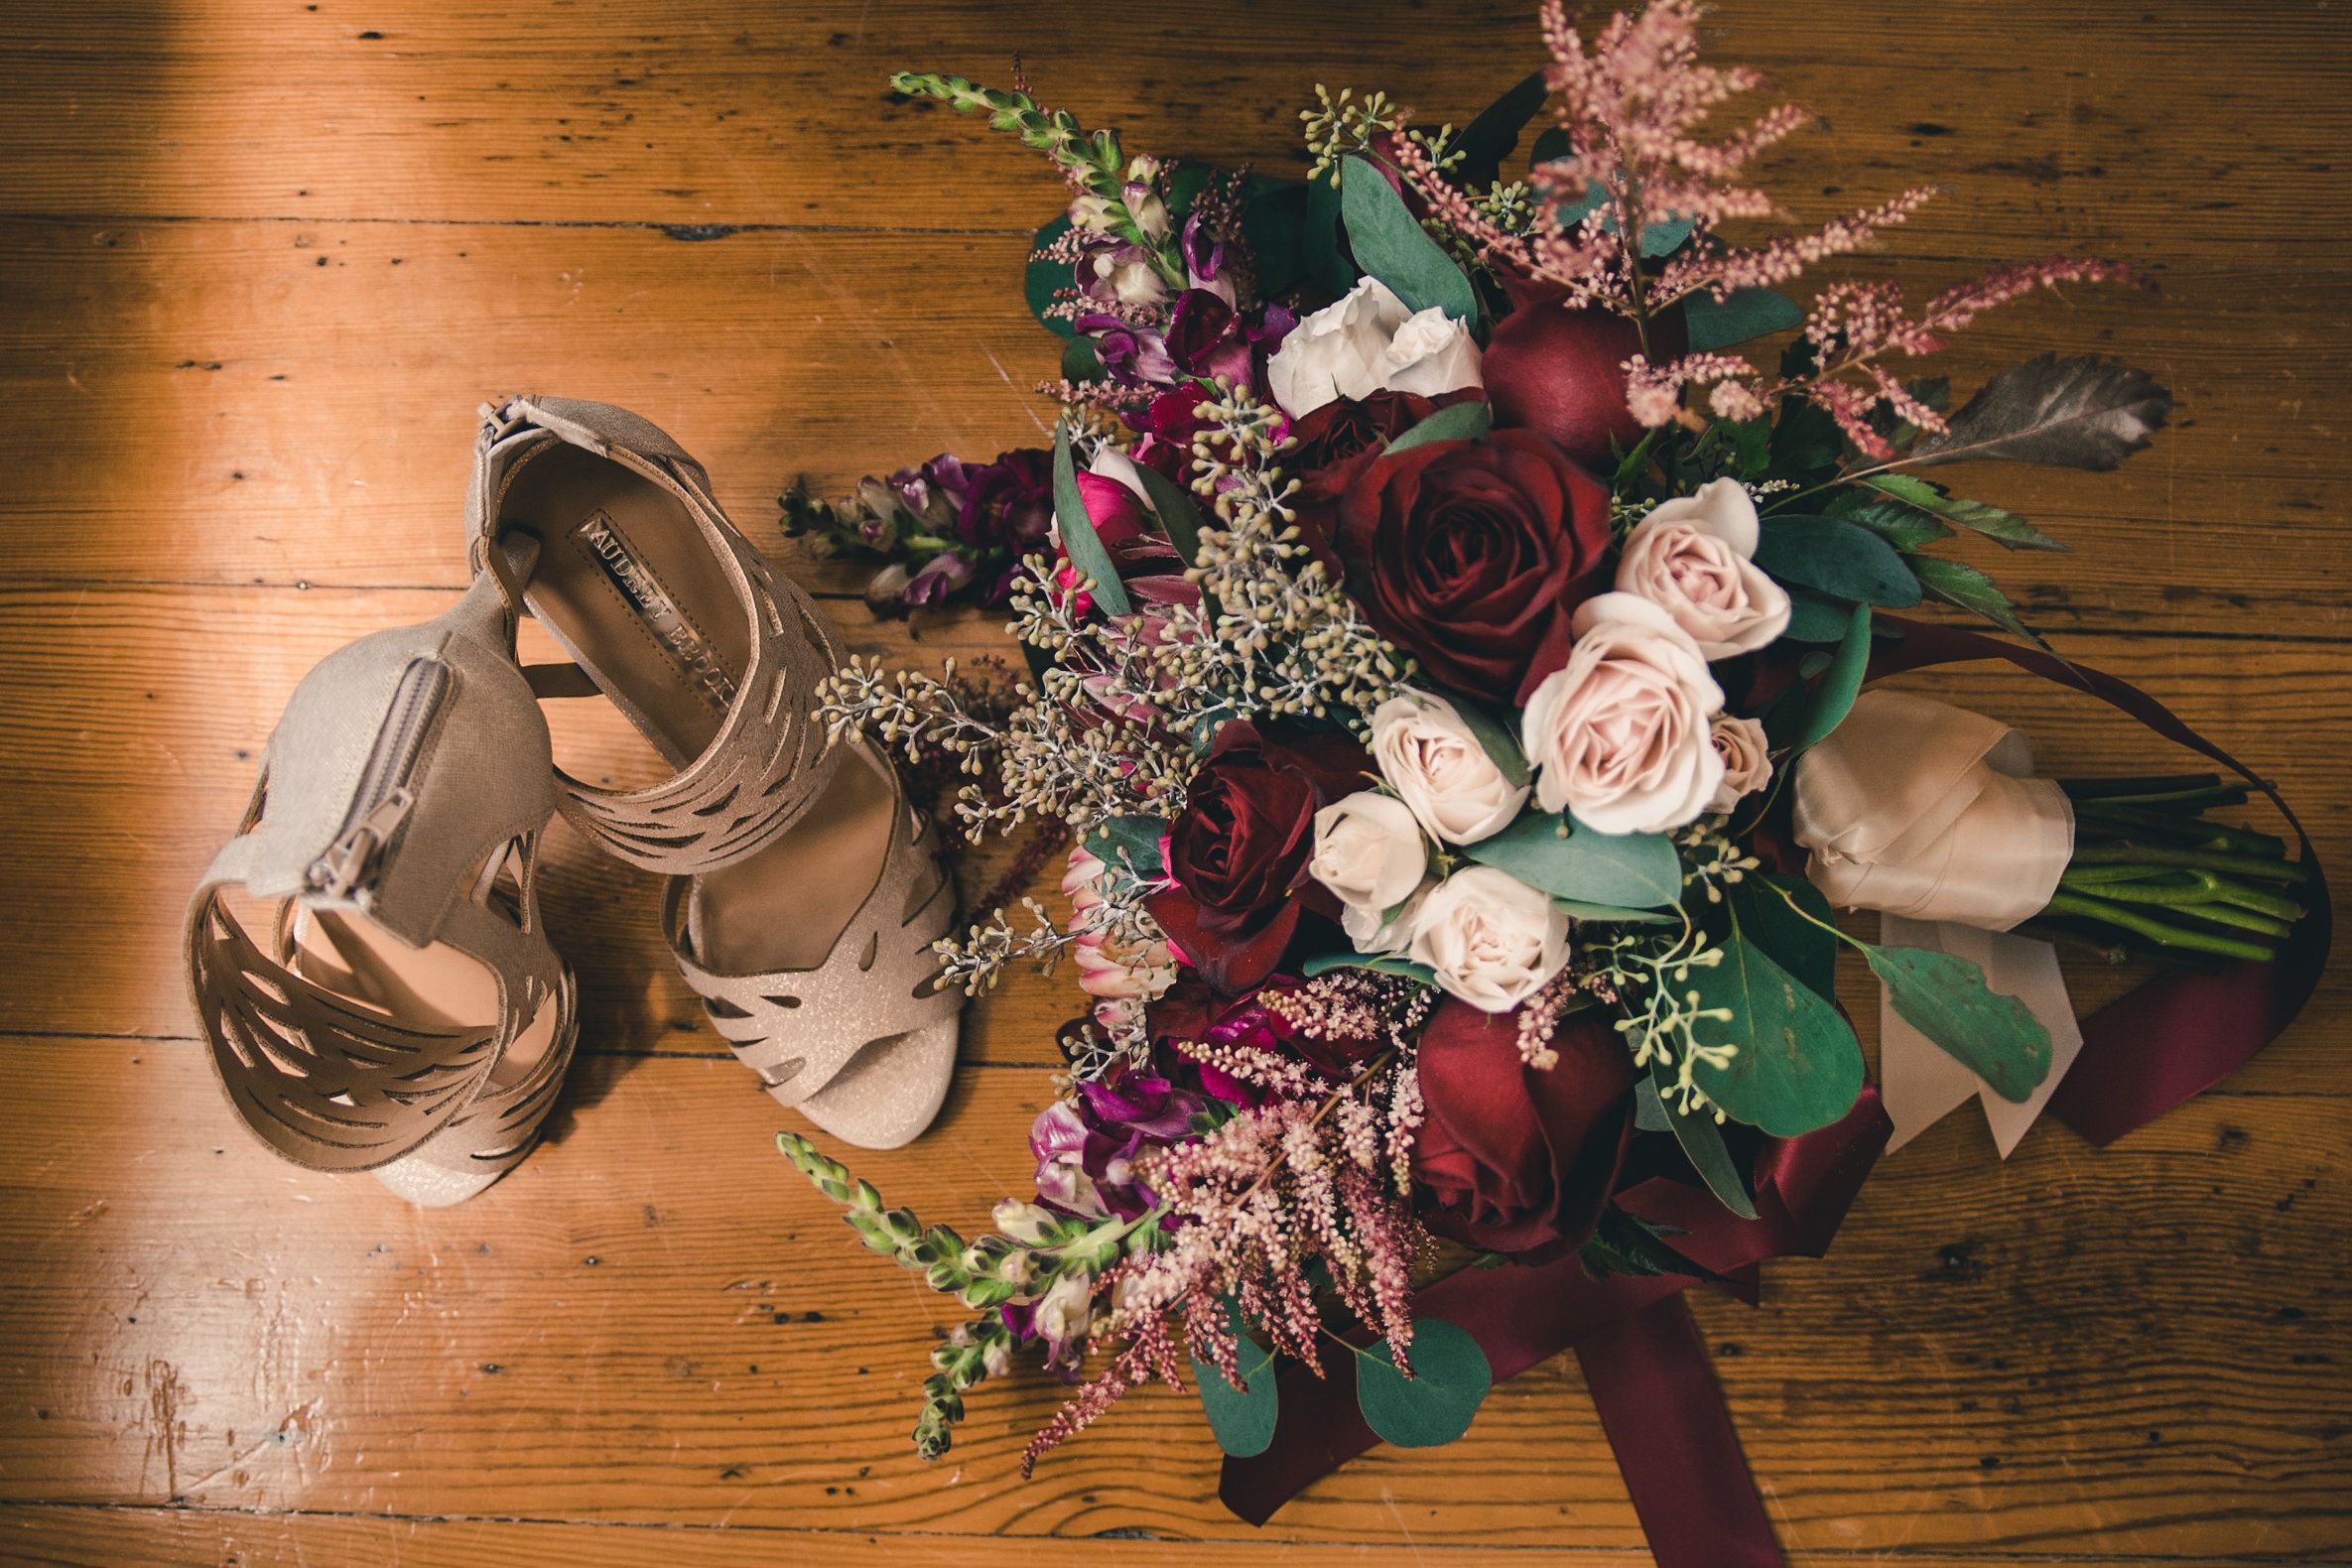 Bride's+shoes+and+flowers+seen+from+above.jpeg